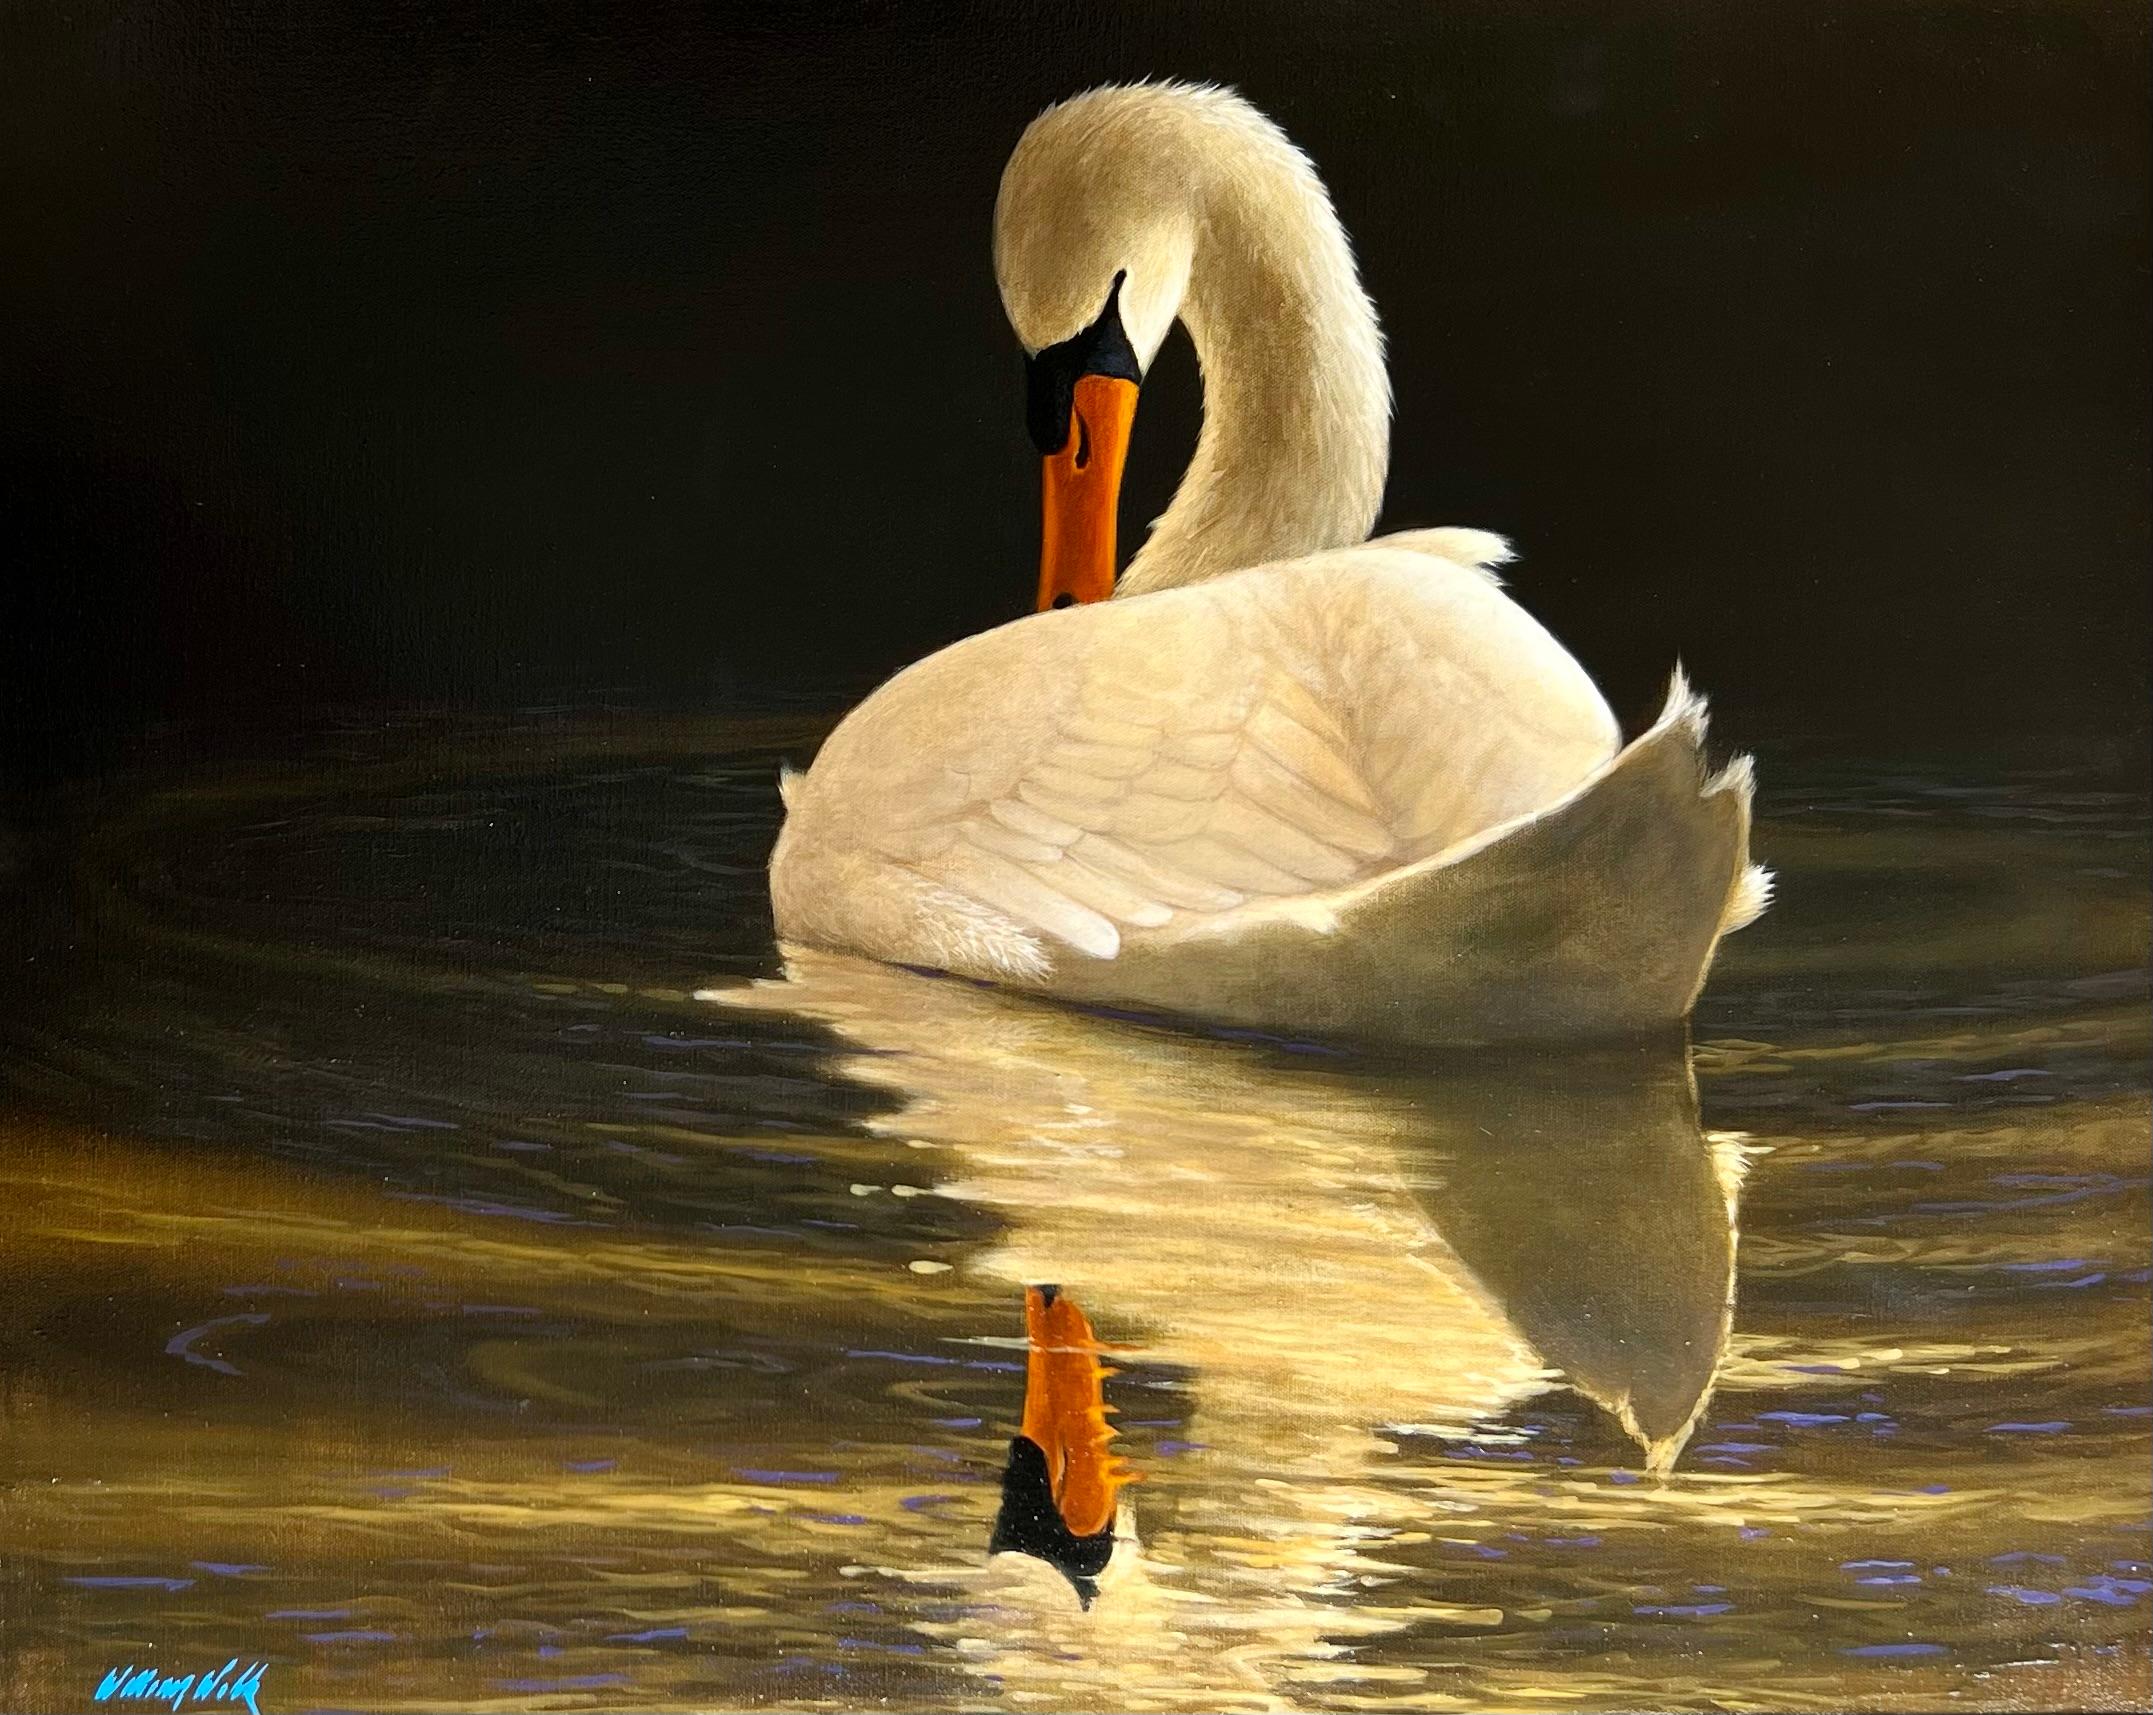 Swan's Reflection - Painting by William Wolk